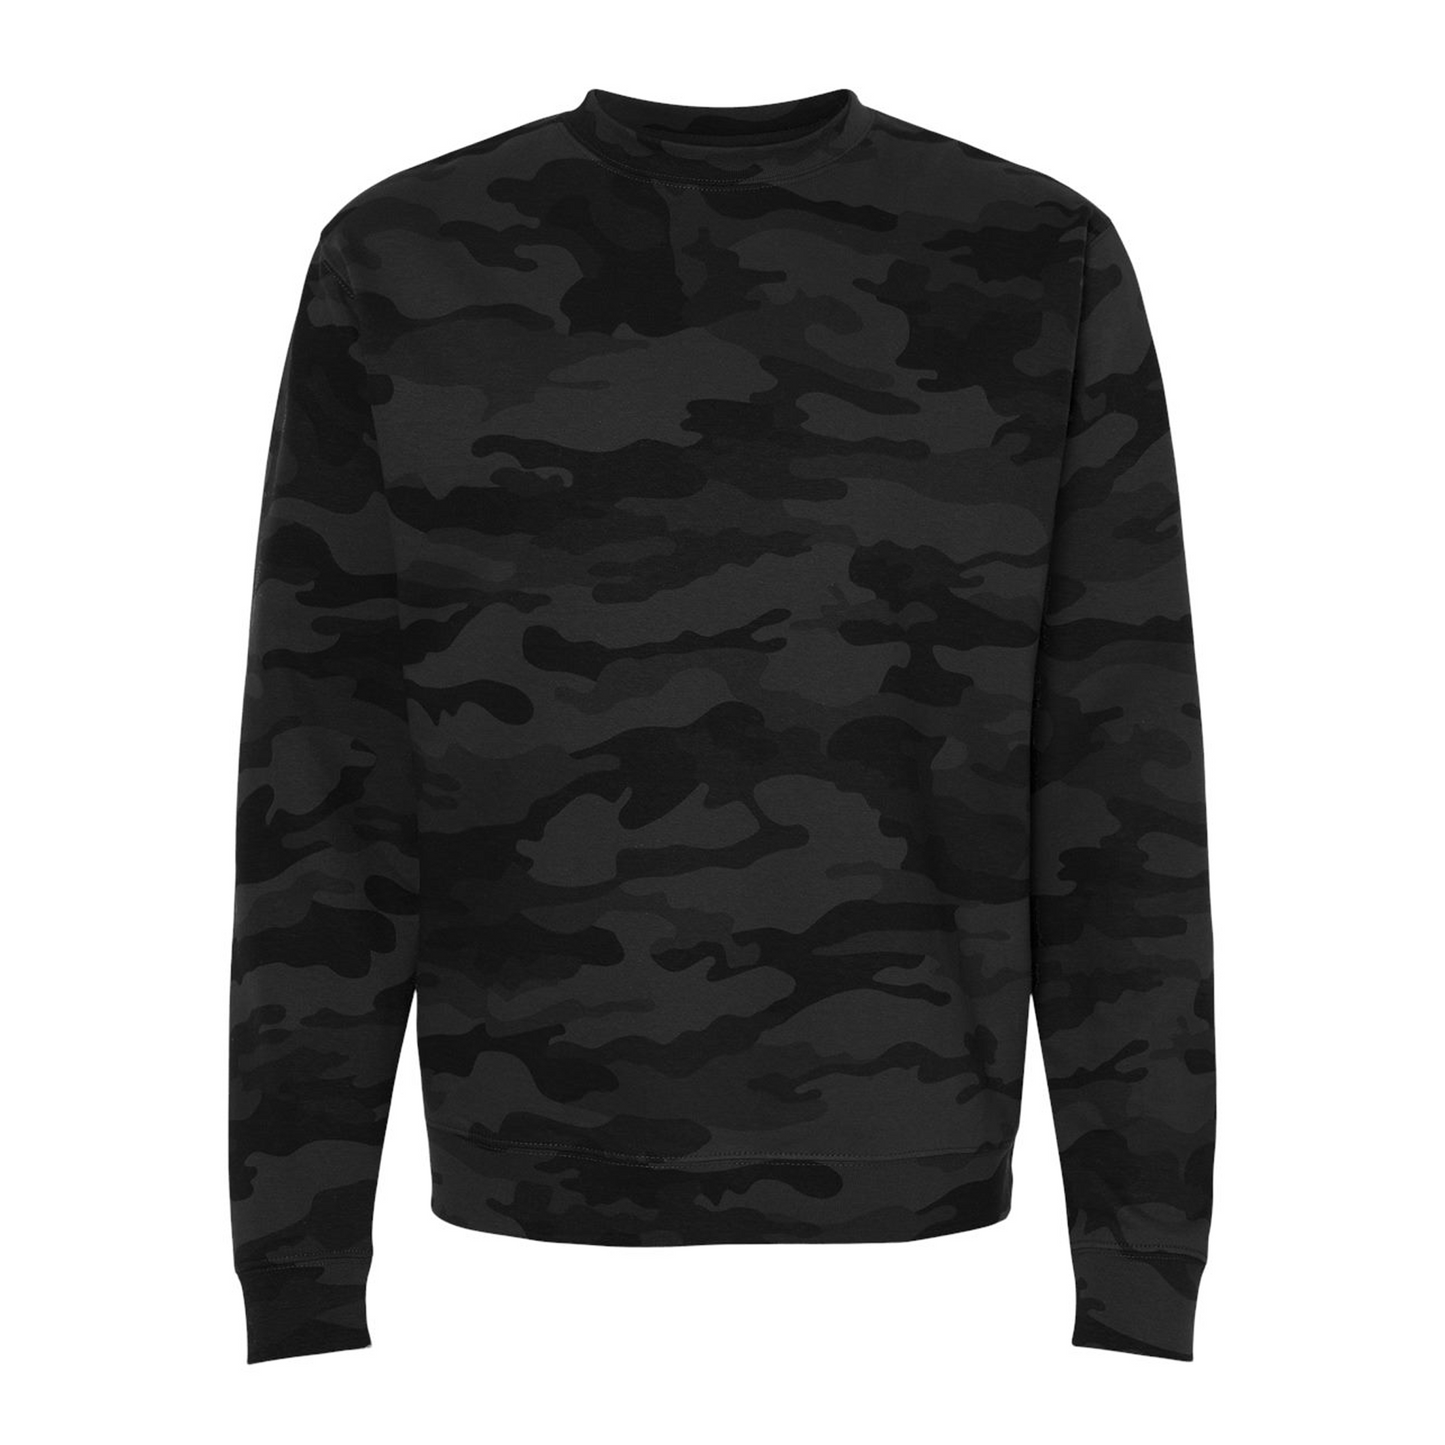 Independent Trading Co. - Midweight Crewneck Sweatshirt - SS3000